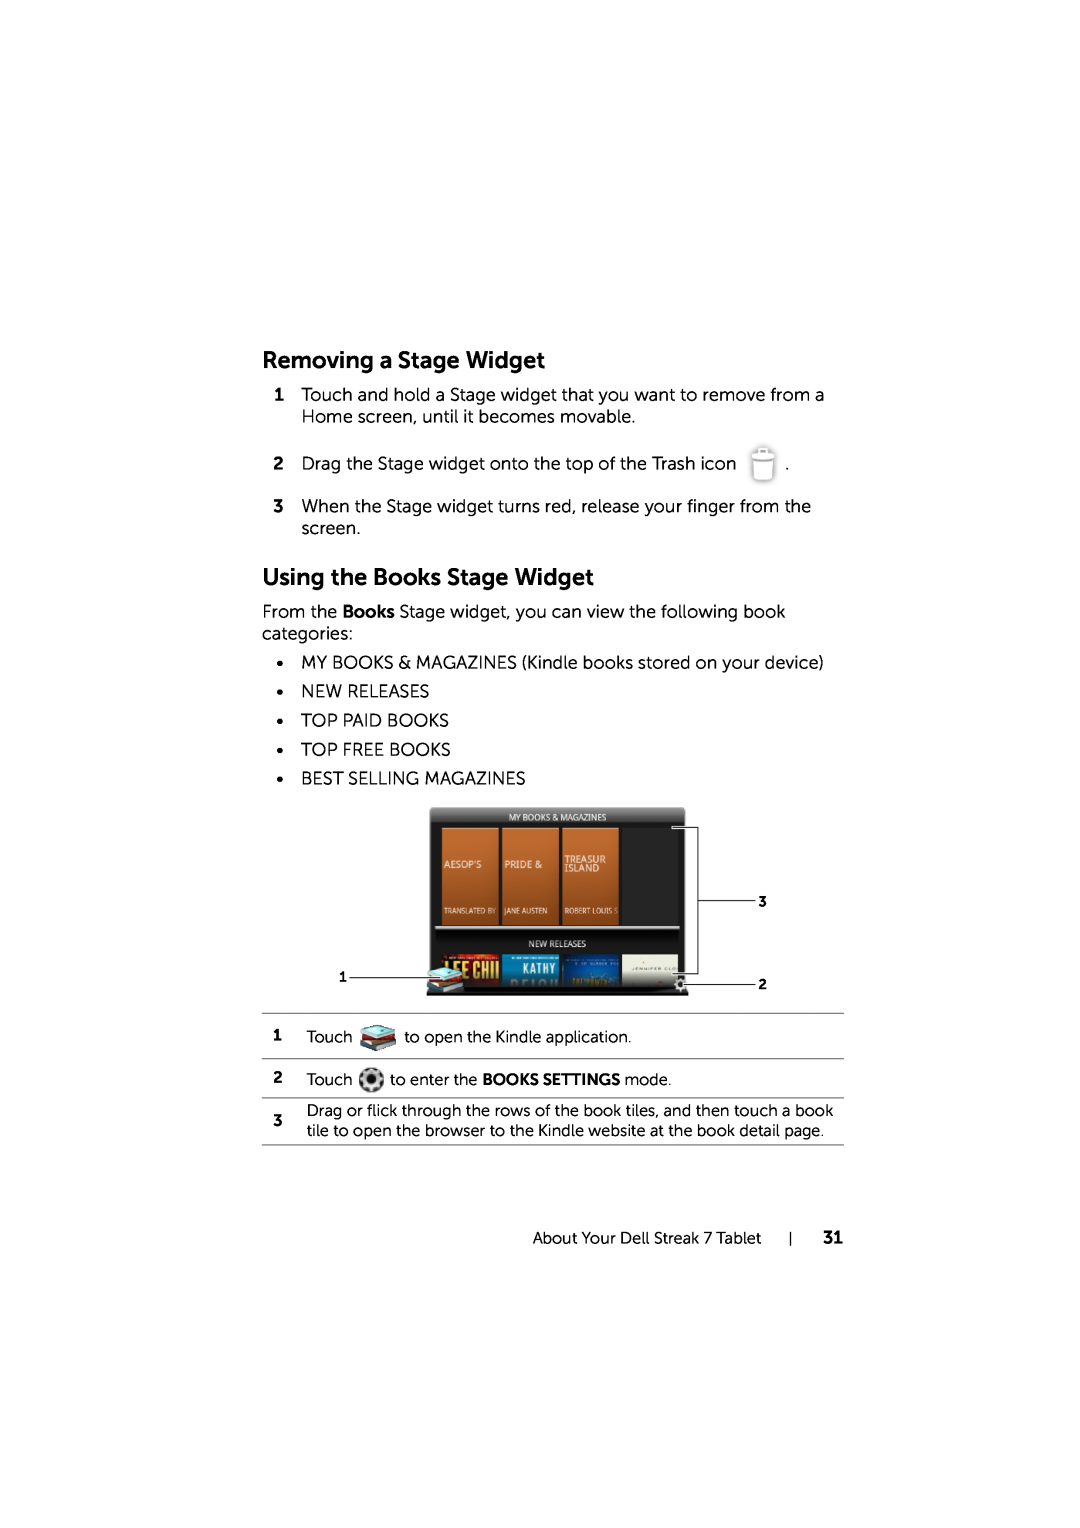 Dell LG7_bk0 user manual Removing a Stage Widget, Using the Books Stage Widget 